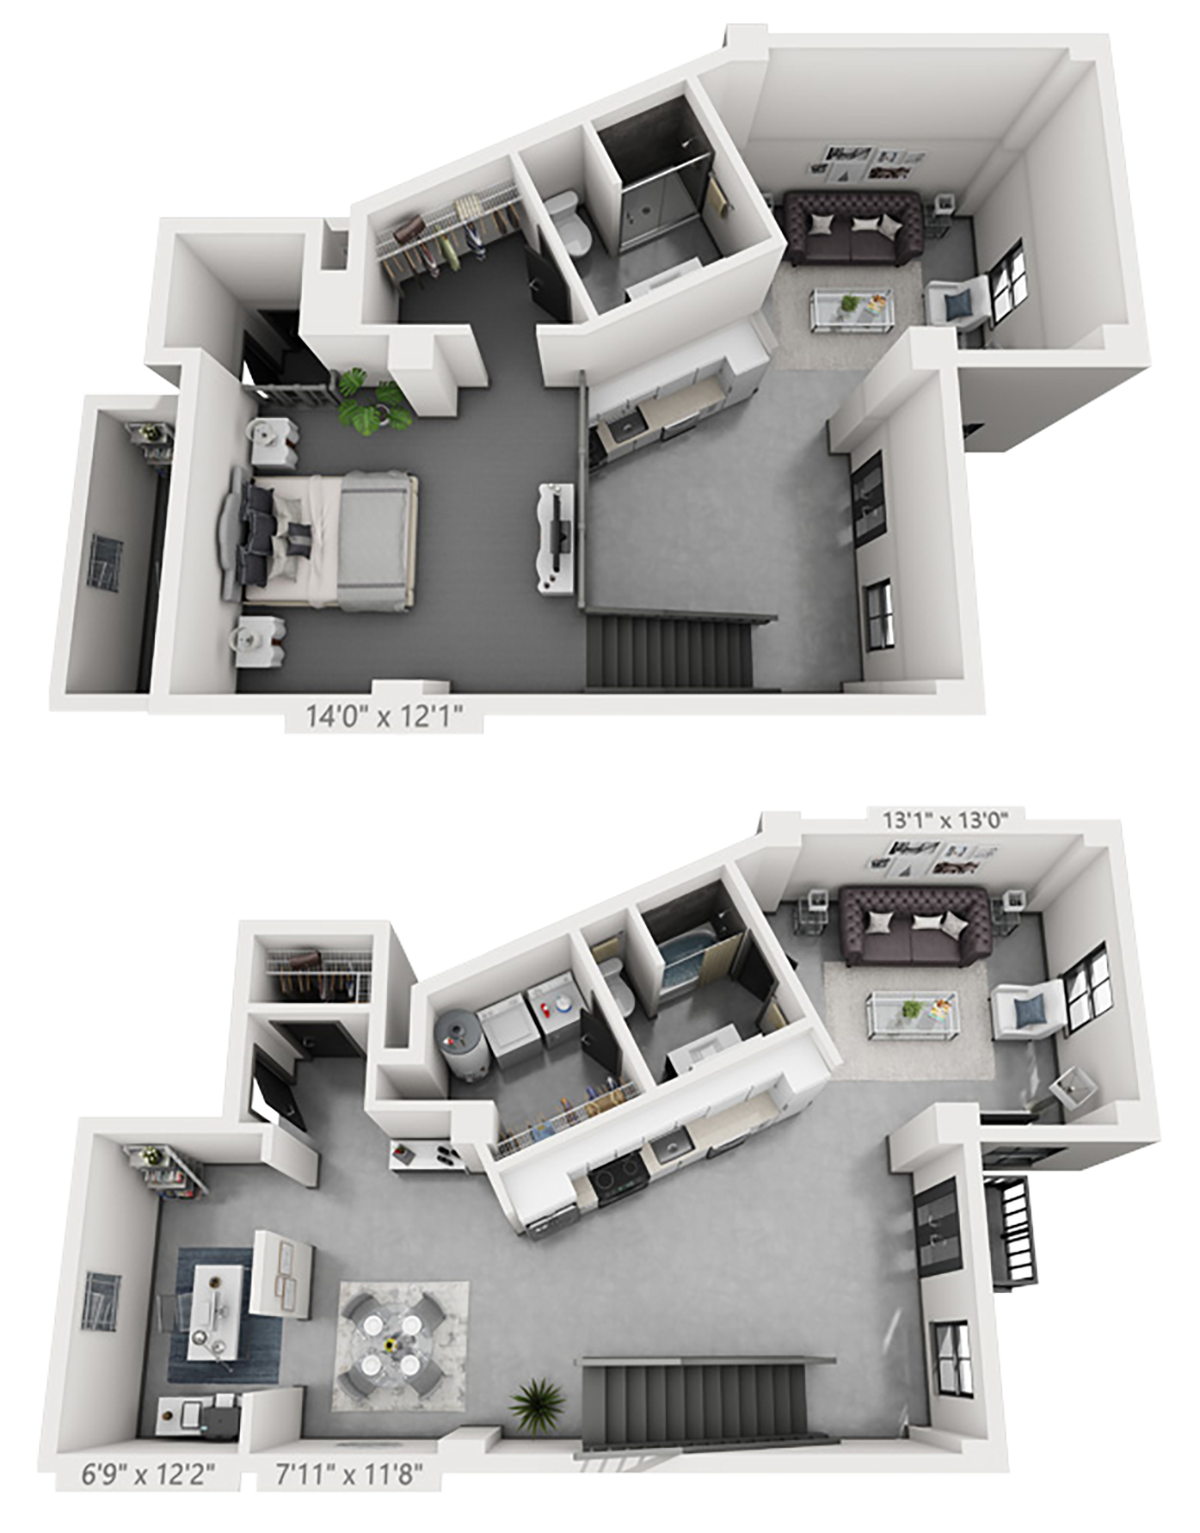 B18M plan is 1 bed, 2 bath and 1,642 square feet